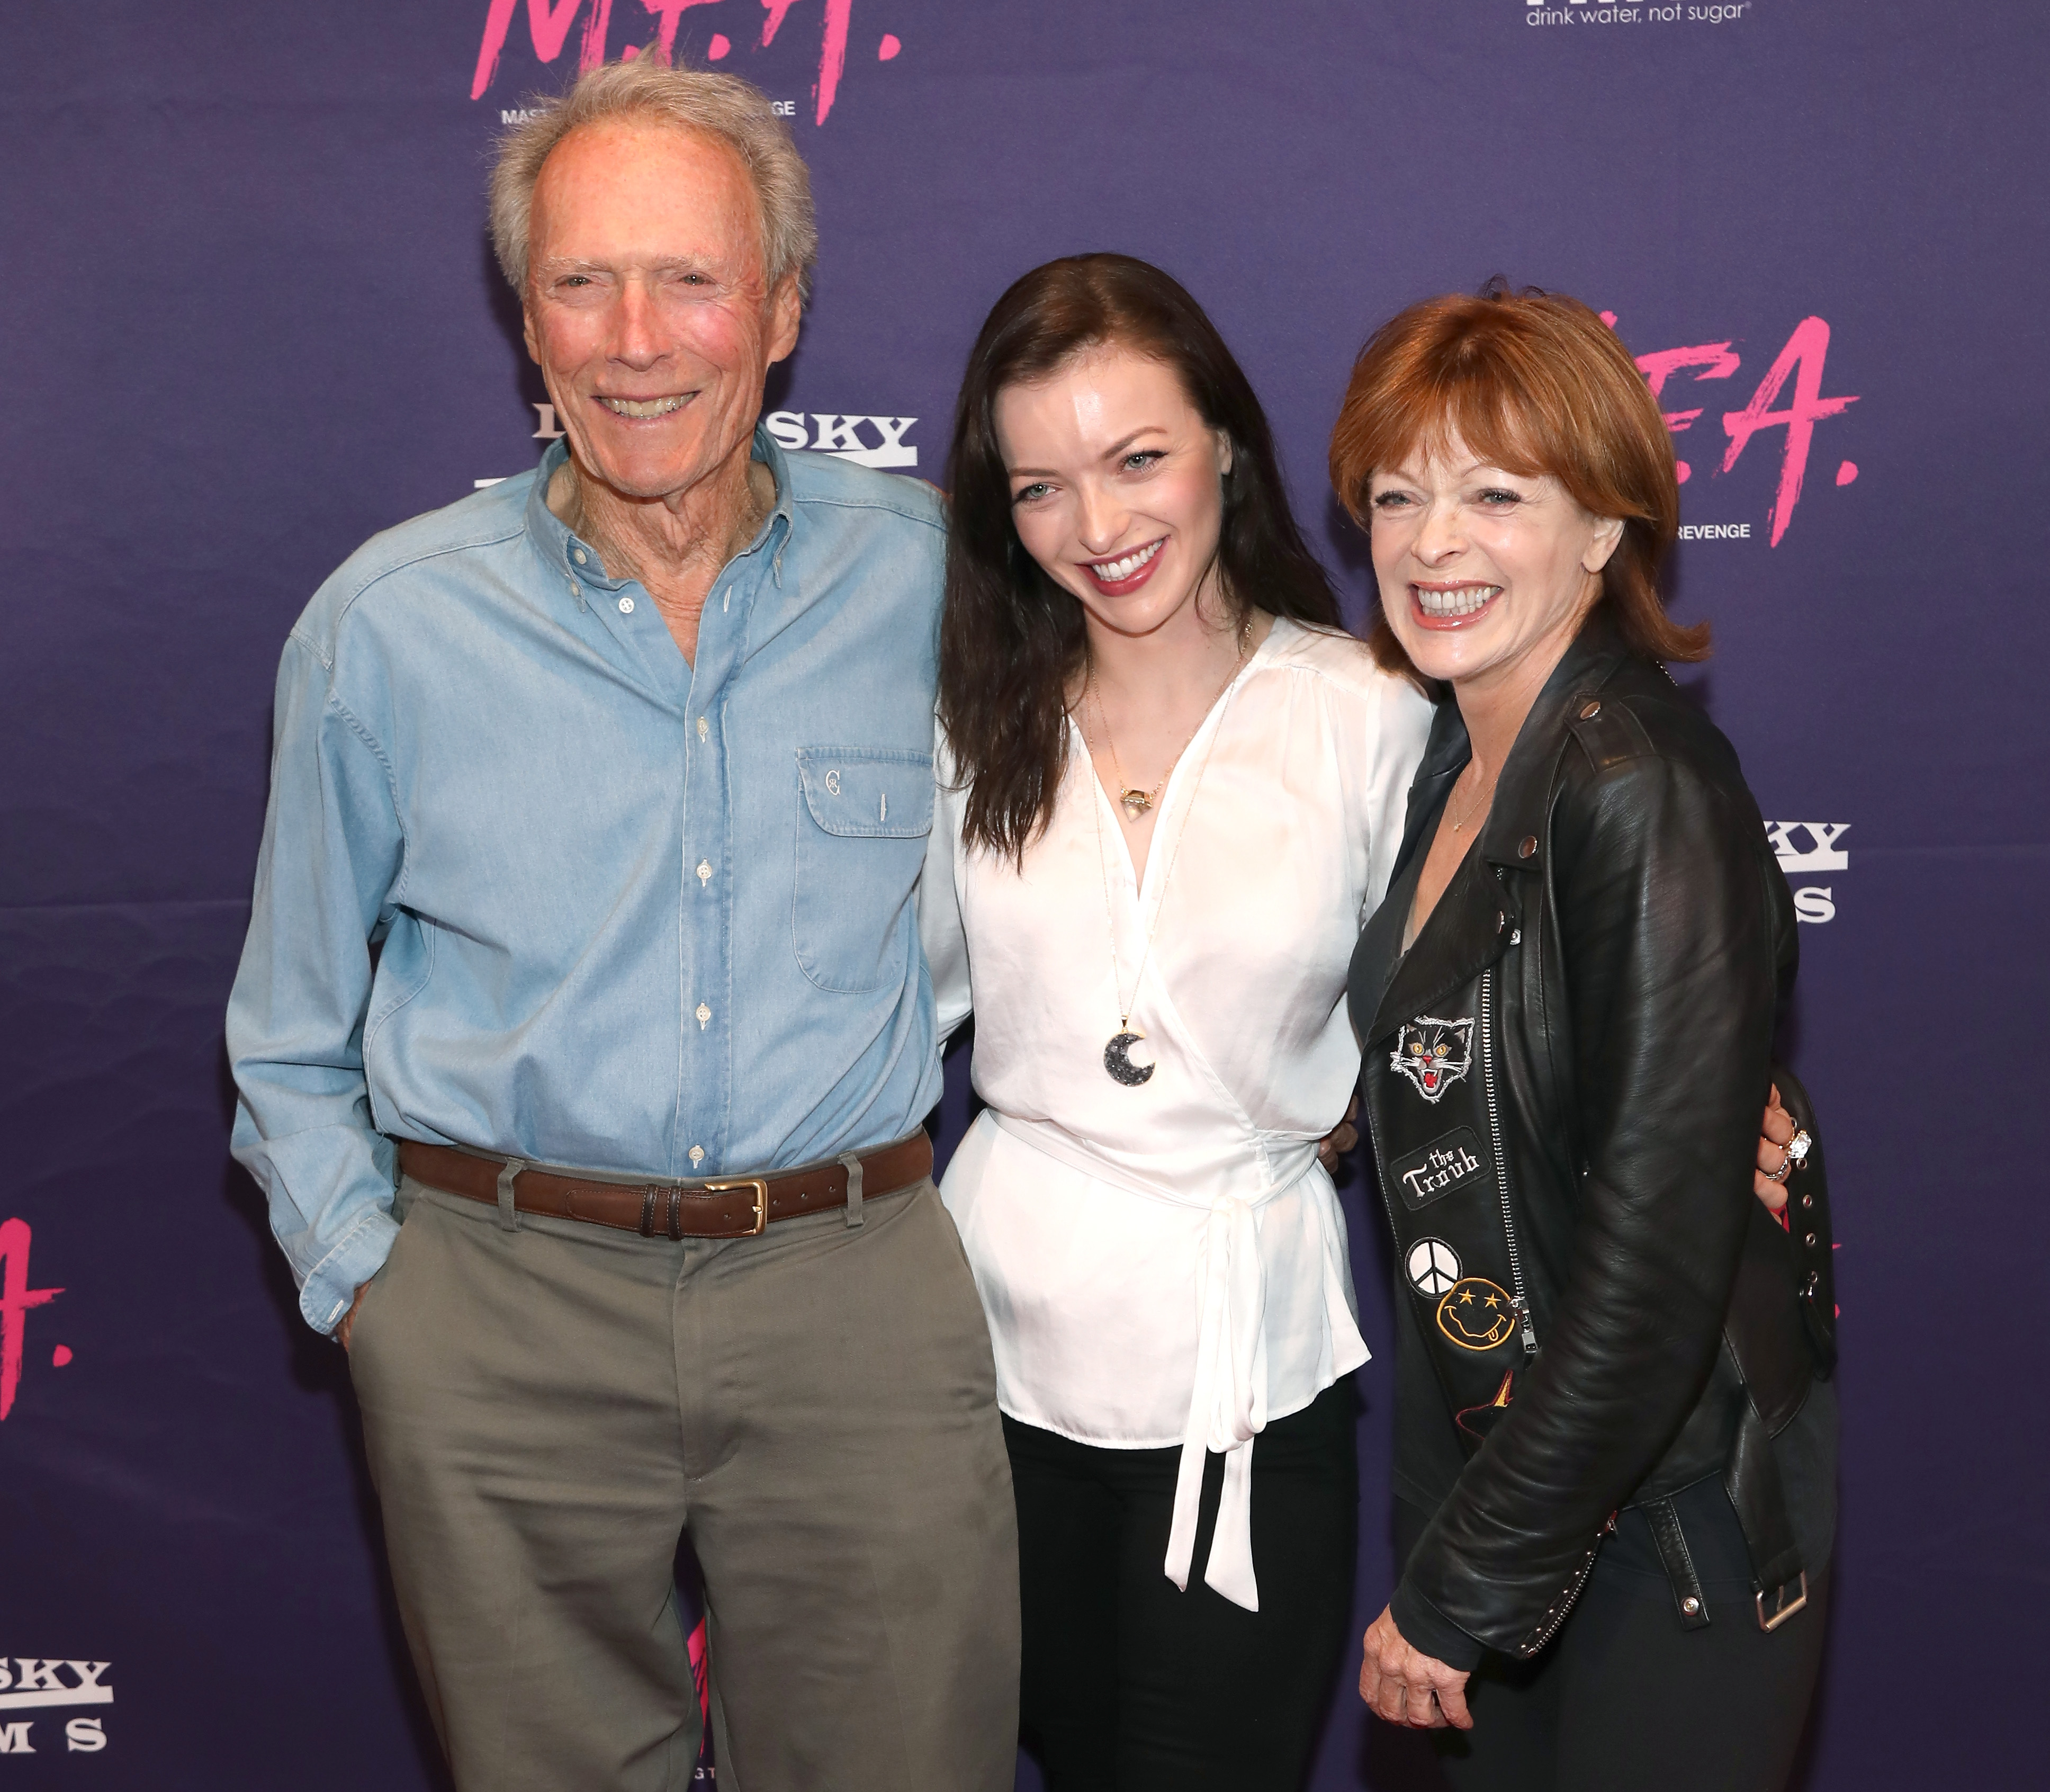 Clint Eastwood, Francesca Eastwood, and Frances Fisher attend the Premiere of Dark Sky Films' "M.F.A." in West Hollywood, California, on October 2, 2017. | Source: Getty Images